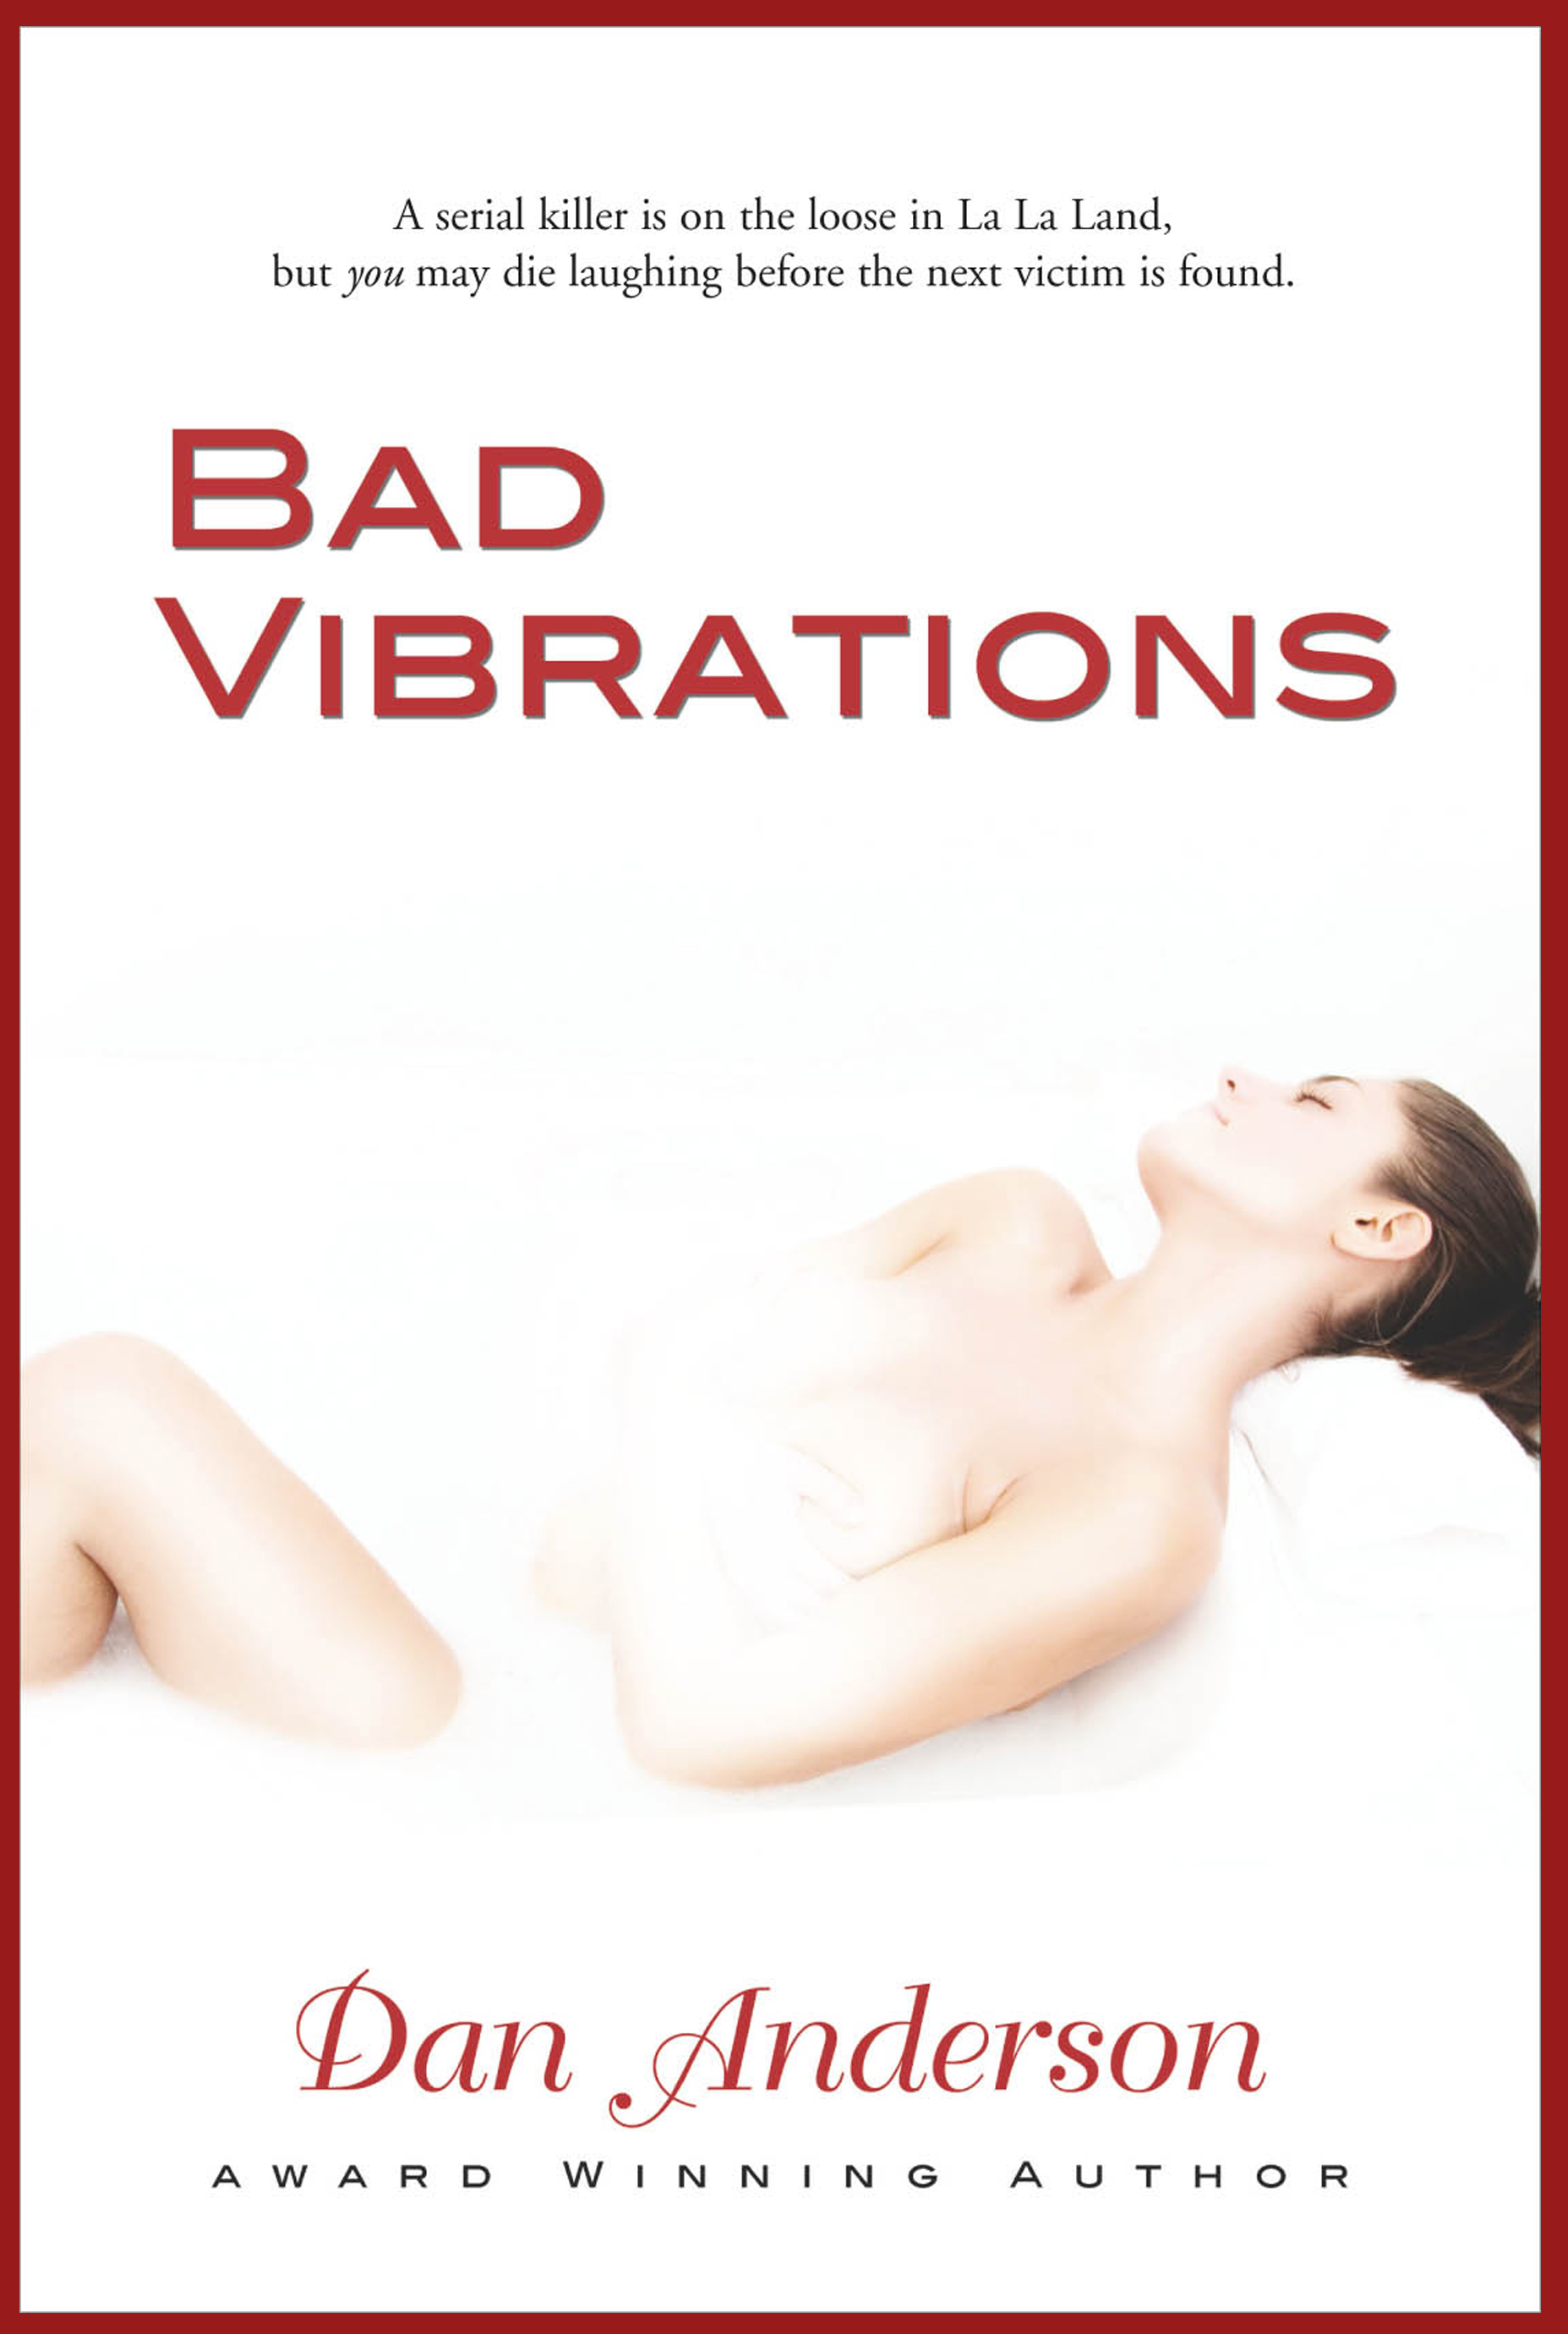 Cover of Bad Vibrations, 1st mystery